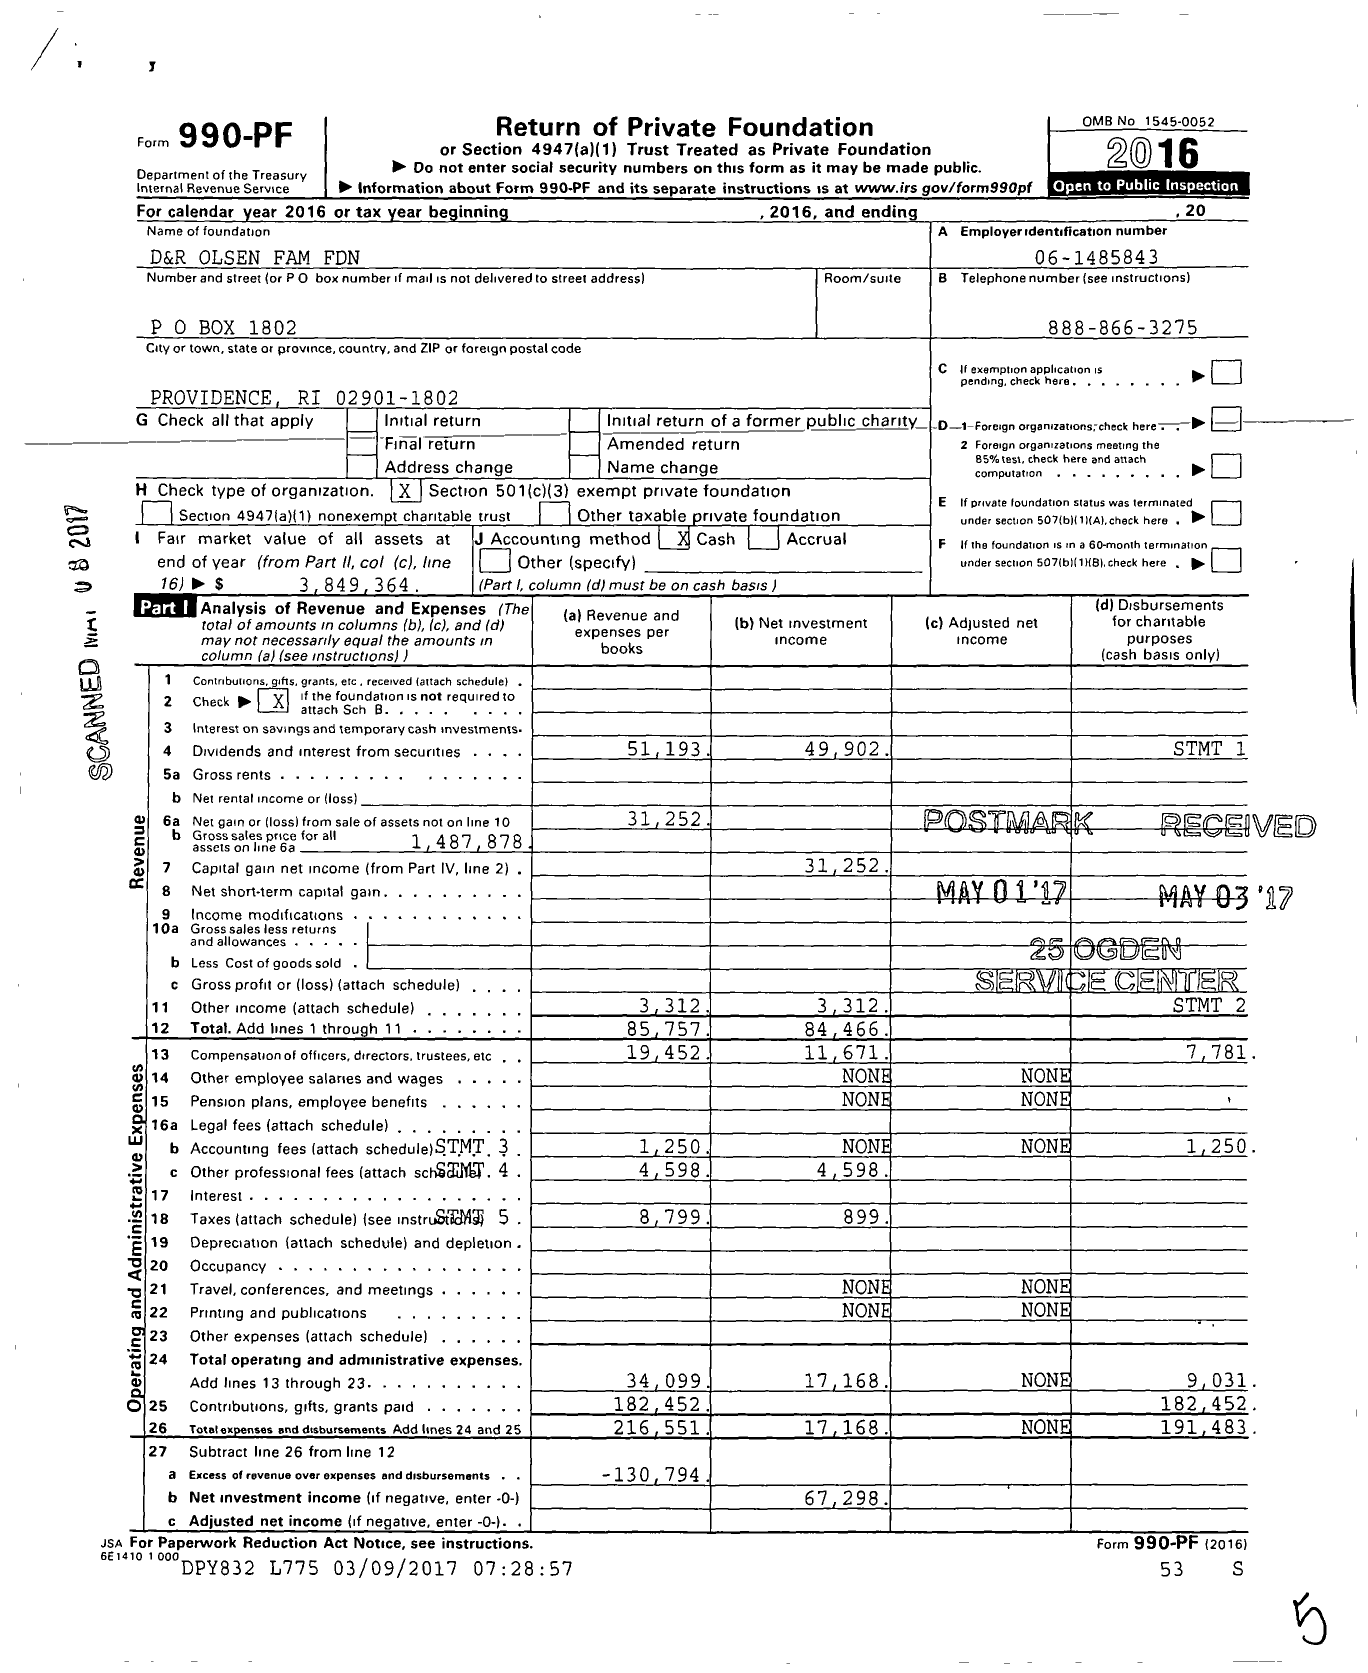 Image of first page of 2016 Form 990PF for D&R Olsen Family Foundation